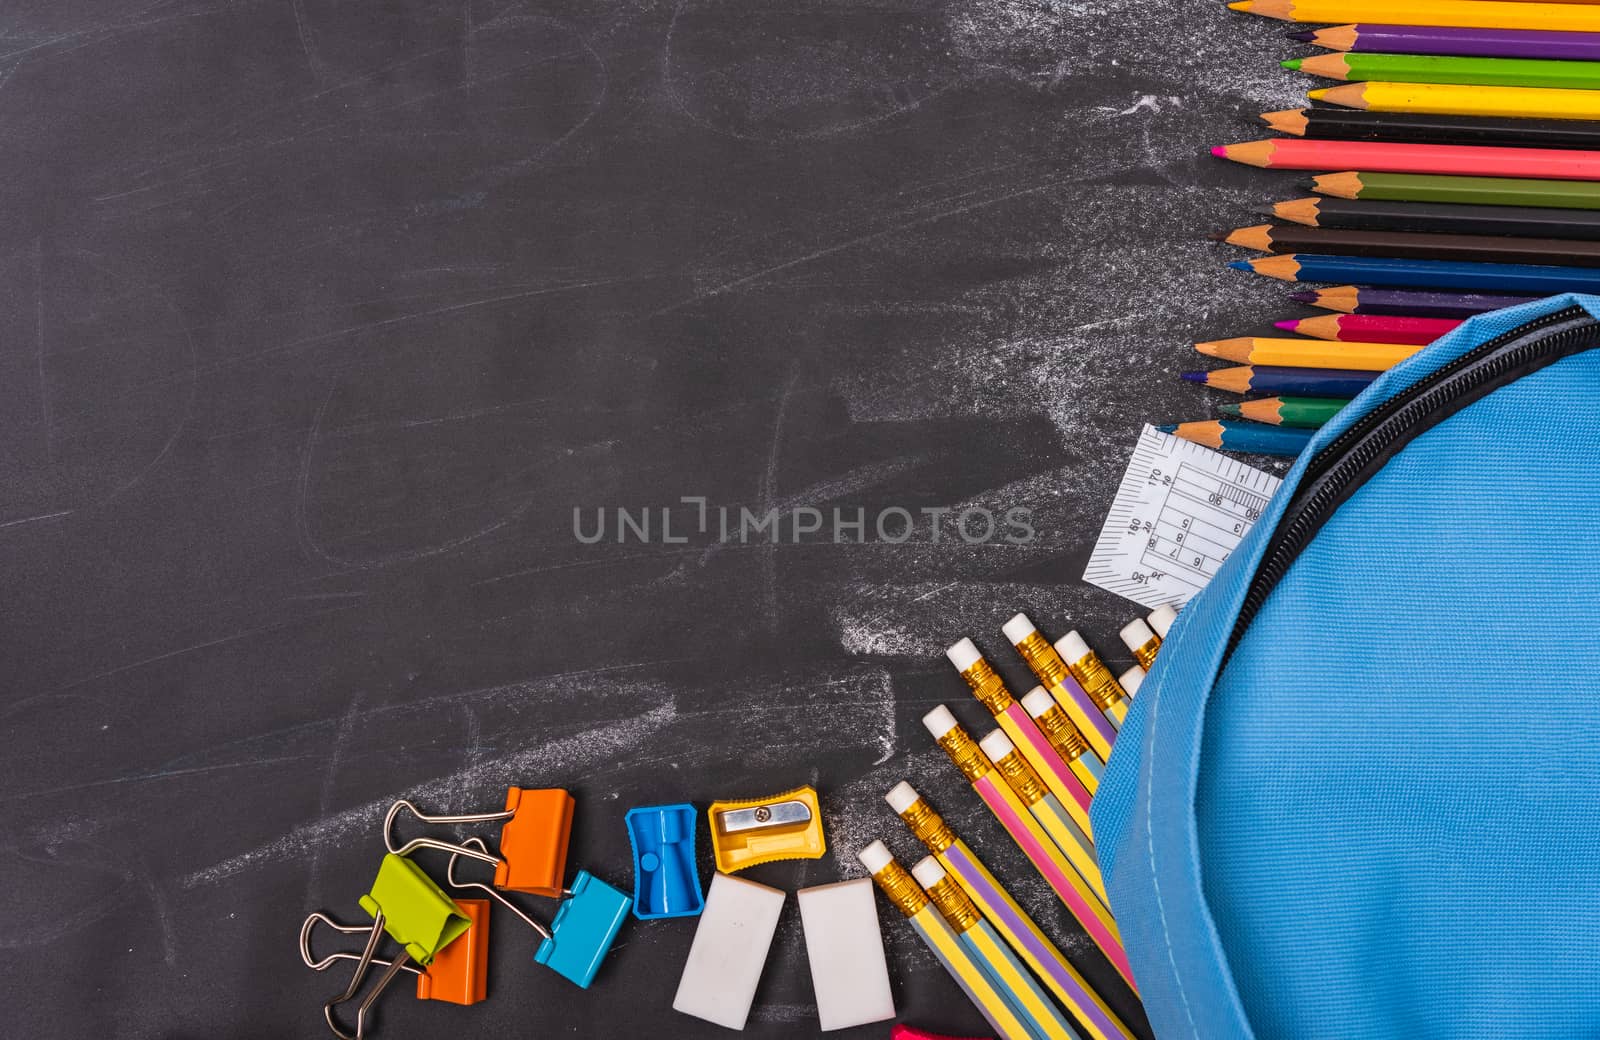 Back to school shopping backpack, Accessories in student blue bag on blackboard background